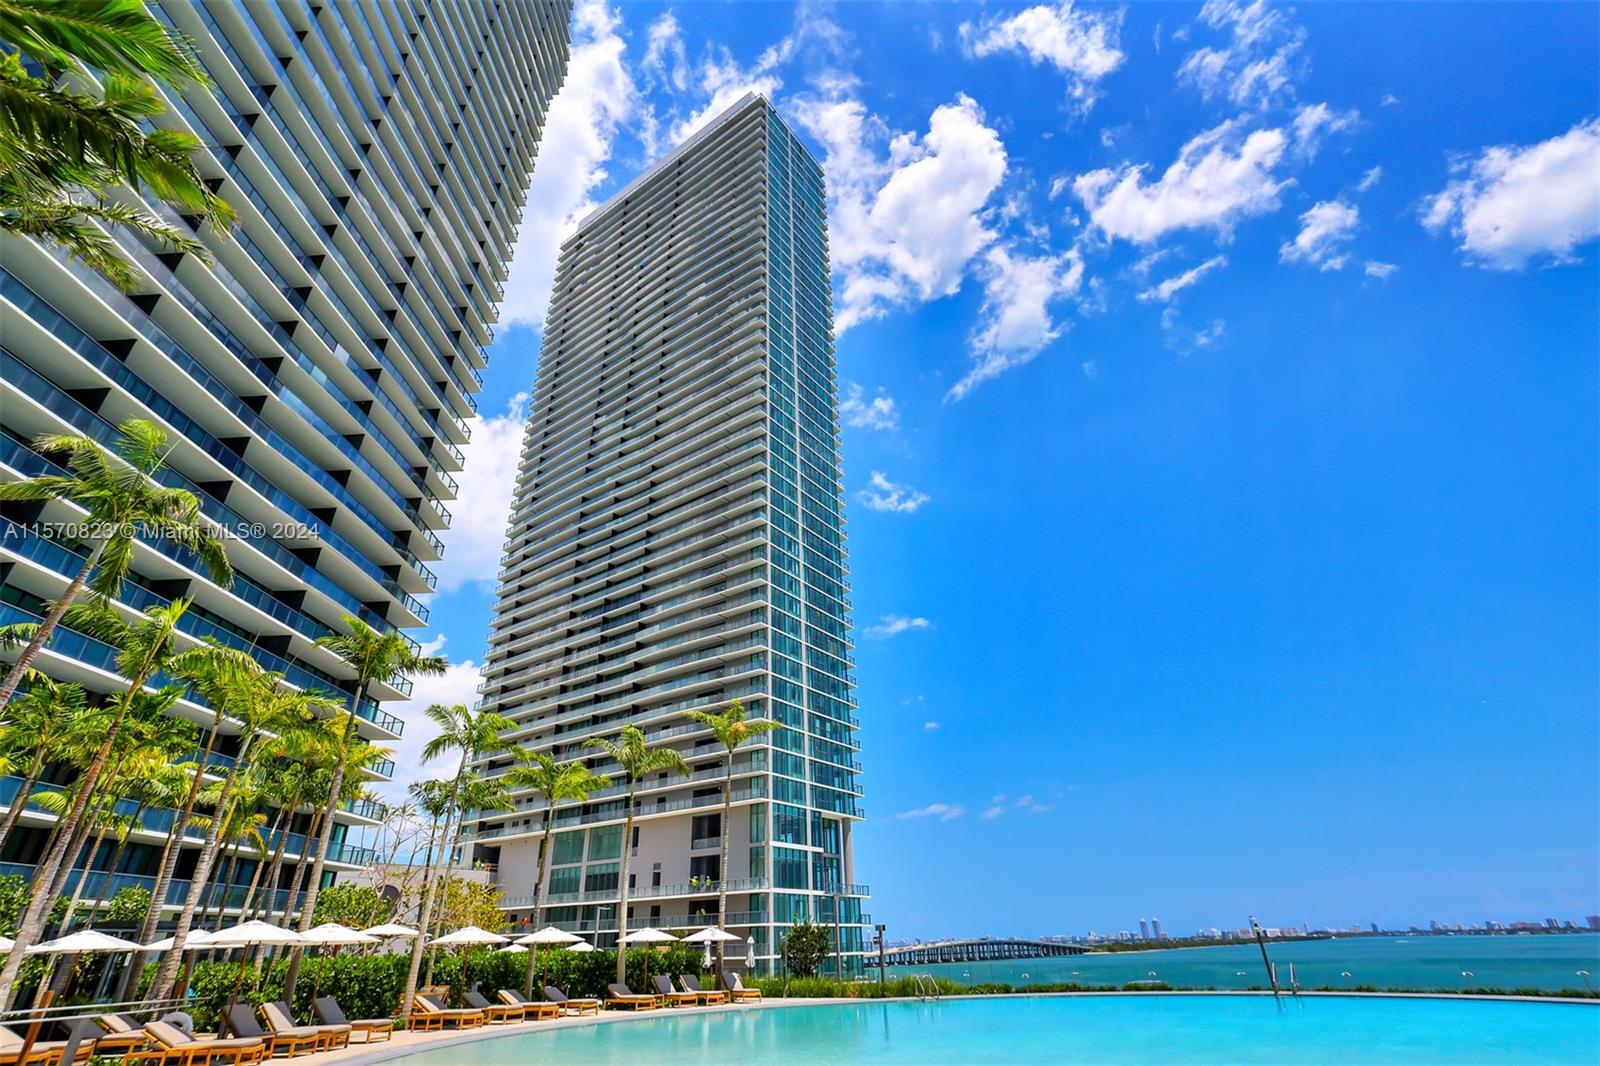 Send full offers including credit report, 3 last month income statements,ID and CTL. Fee cleaning $ 350/pet 600 nonrefundable. Stunning residence! Floor-to-ceiling glass, tile floors, Boch/Subzero appliances, custom closet & shades. The amenities of Paraiso Bay that features a beautiful pool, spa, movie theater, social room, billiard & children's room, minigolf course & more. 1 parking.